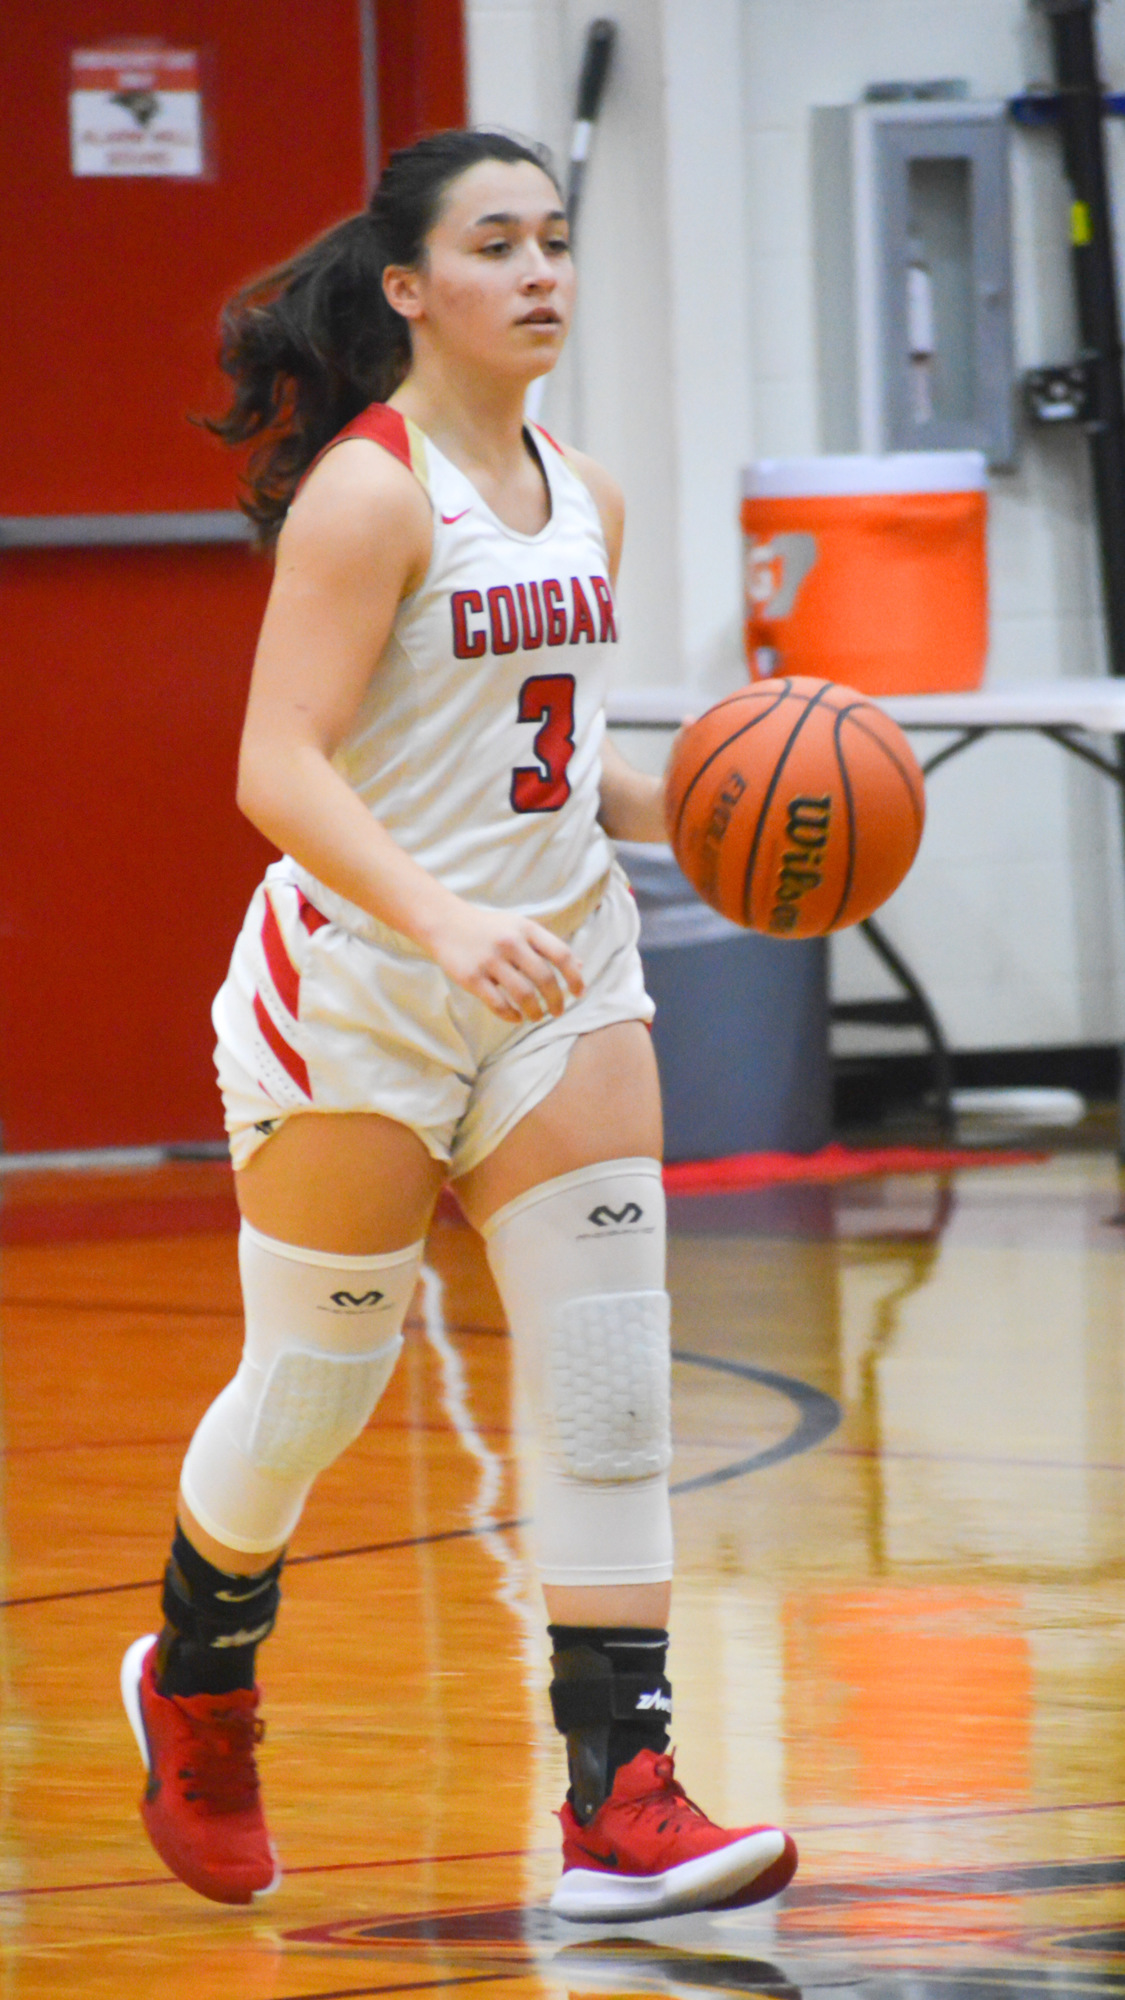 Natalie Mercadante is the team's point guard and a team leader.